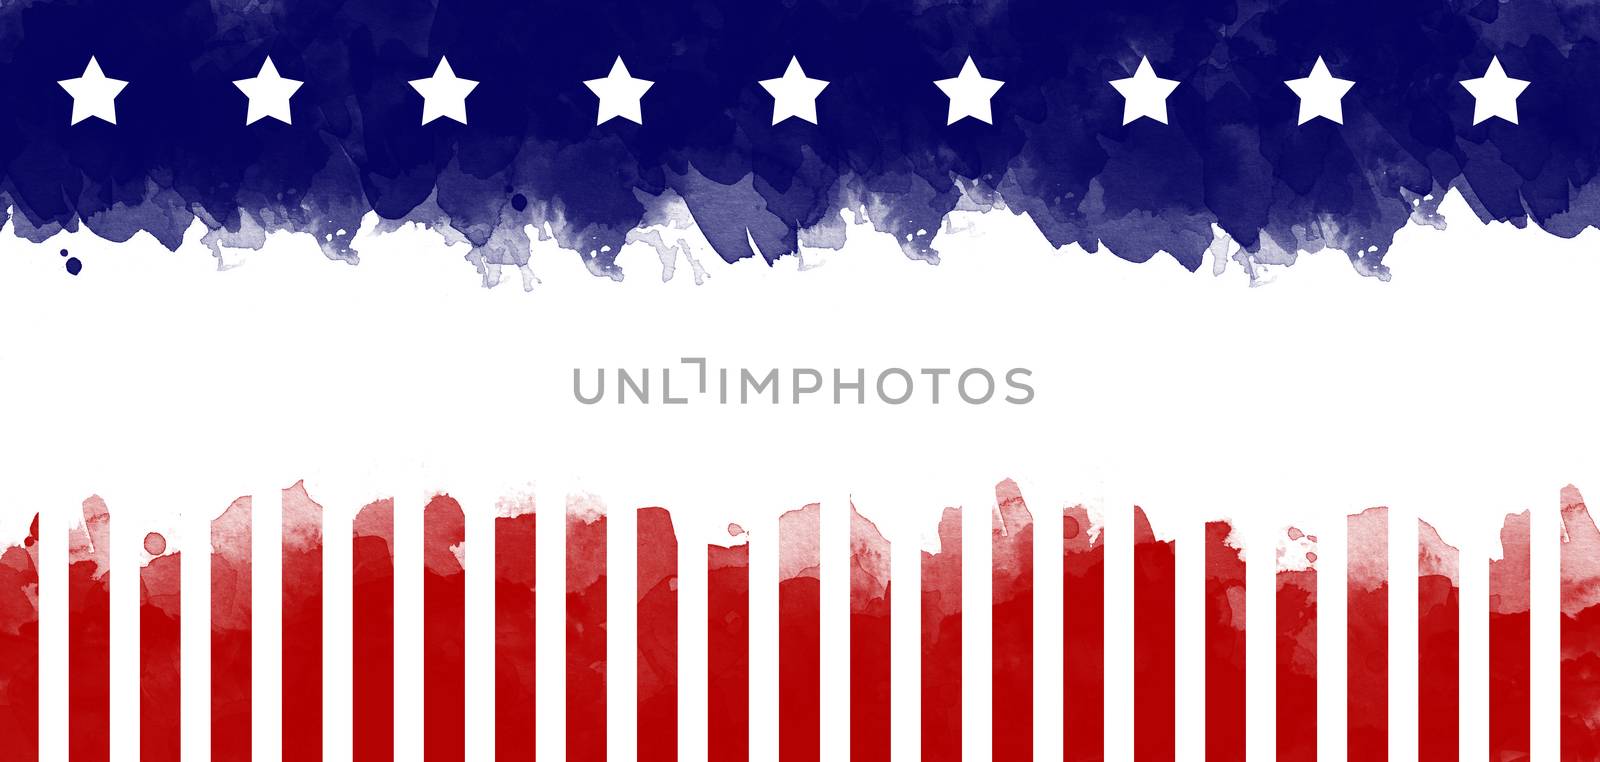 American flag grunge greeting card background by asiandelight